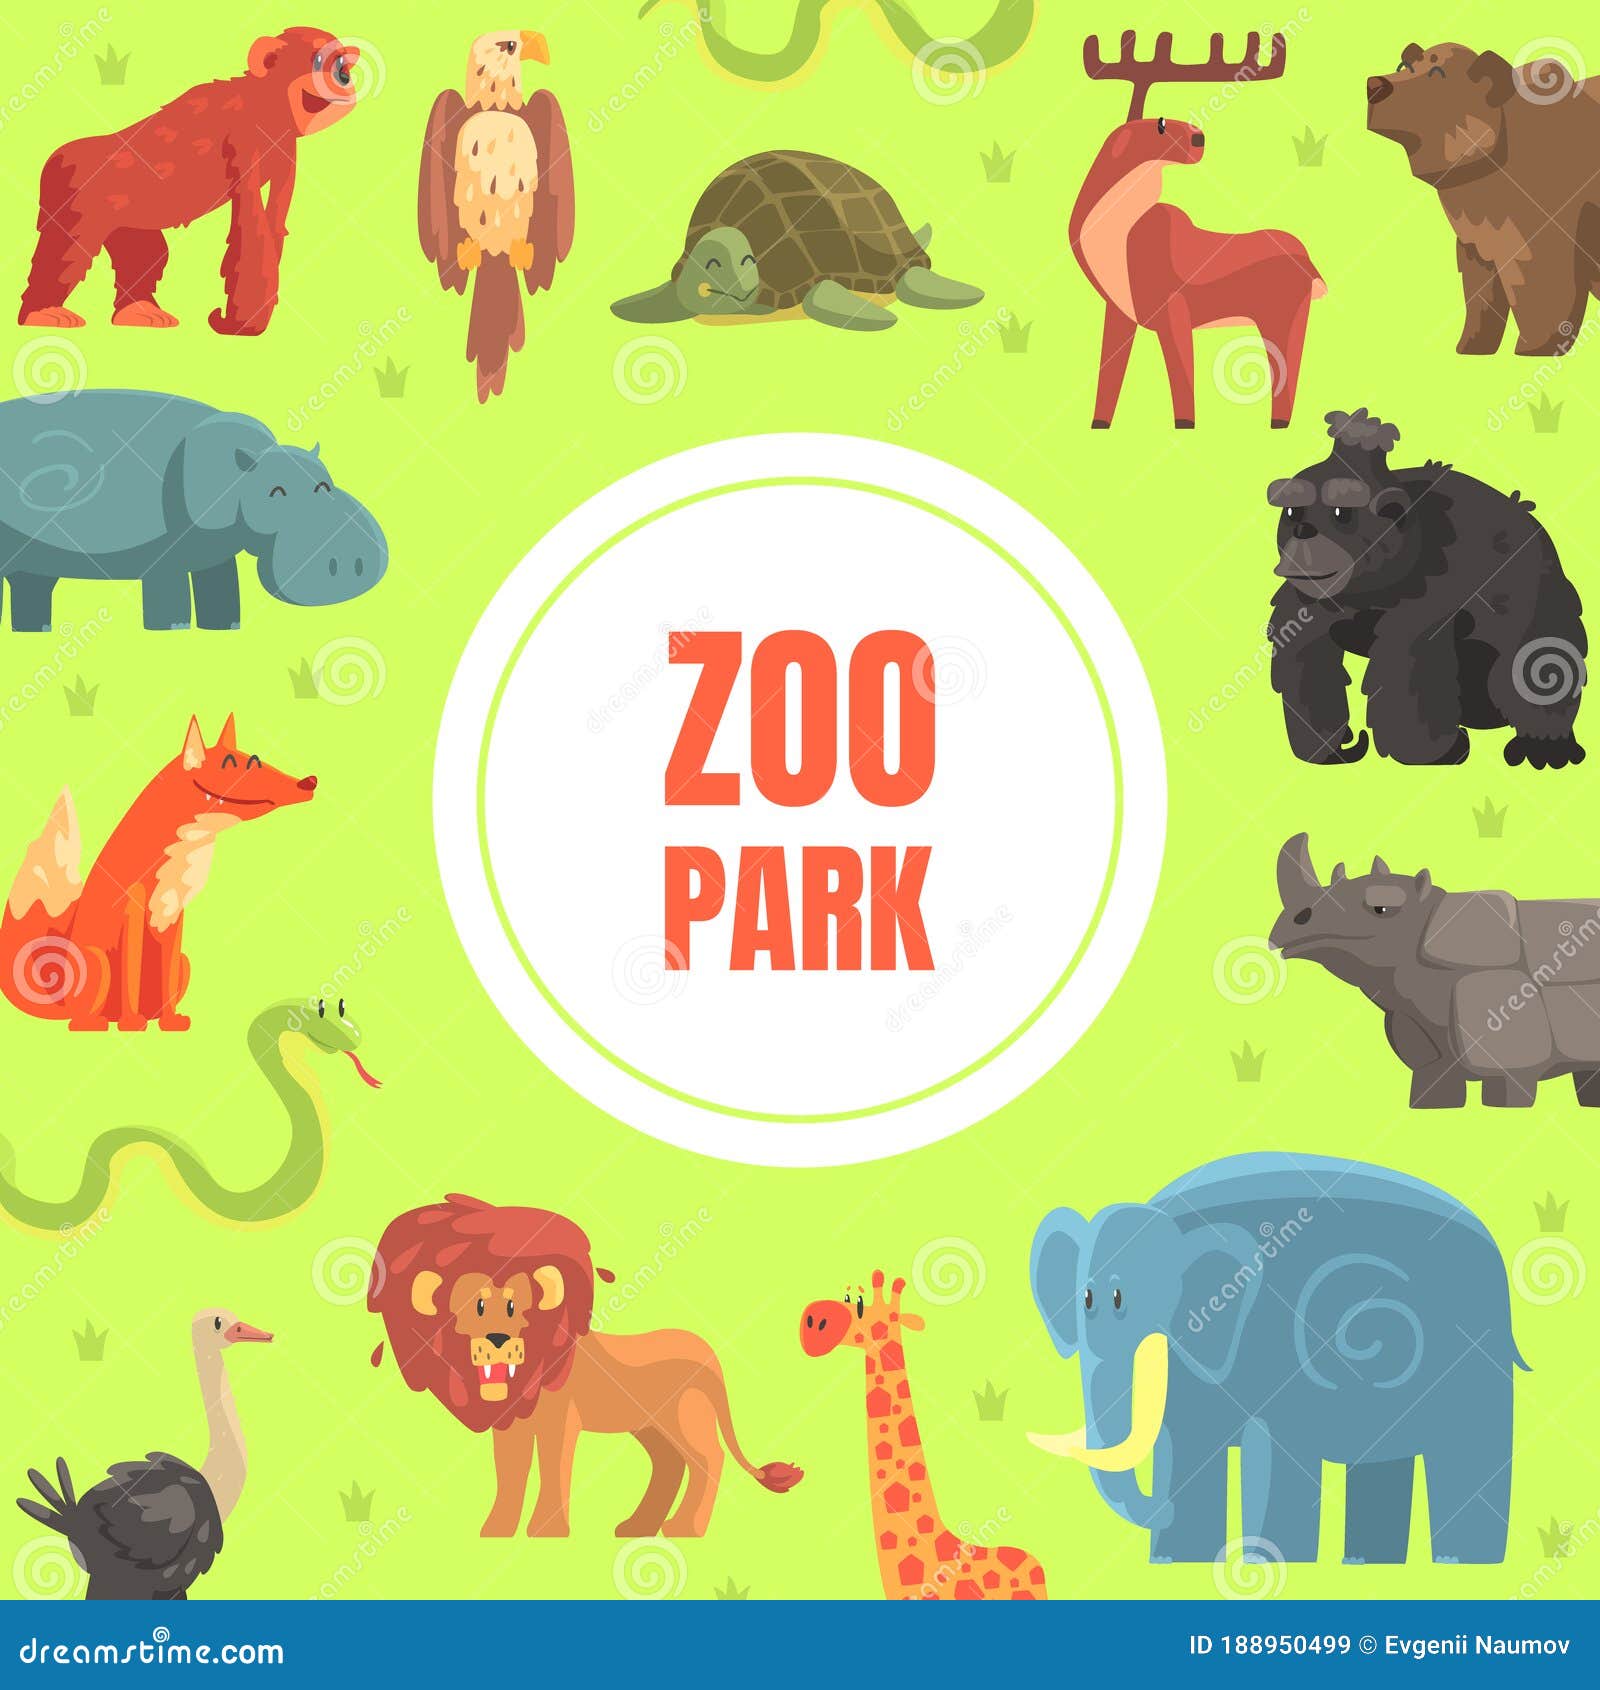 Zoo Park Banner Template with Cute Wild African Animals Vector Illustration  Stock Vector - Illustration of ostrich, giraffe: 188950499